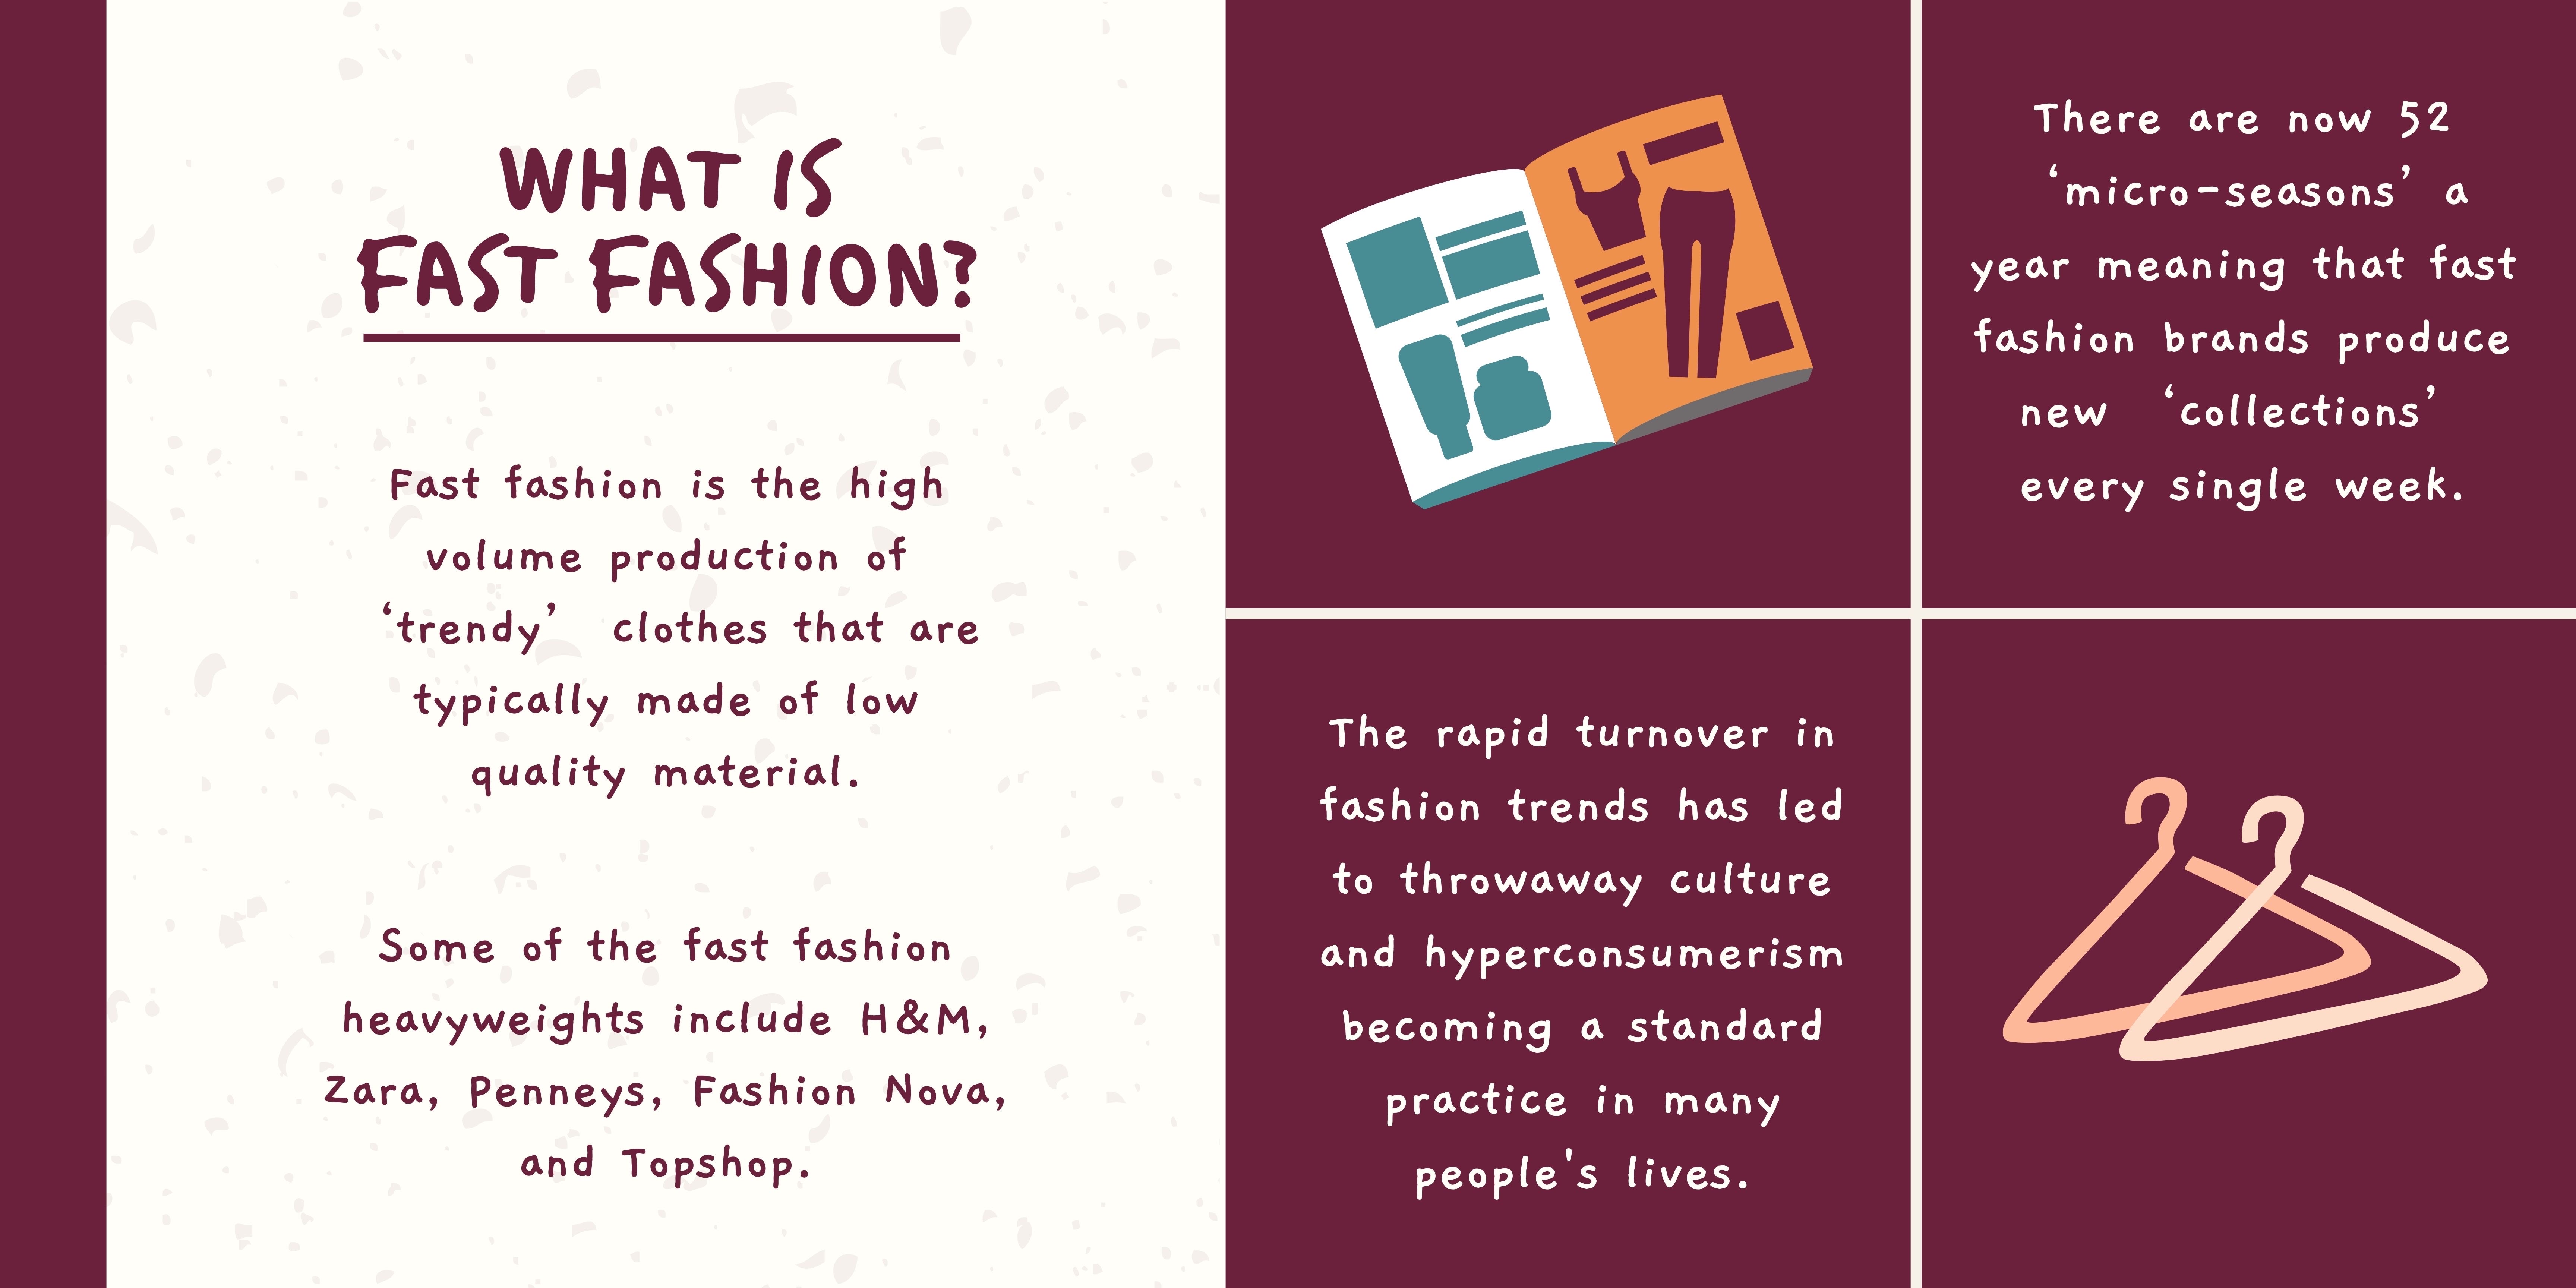 What is fast fashion